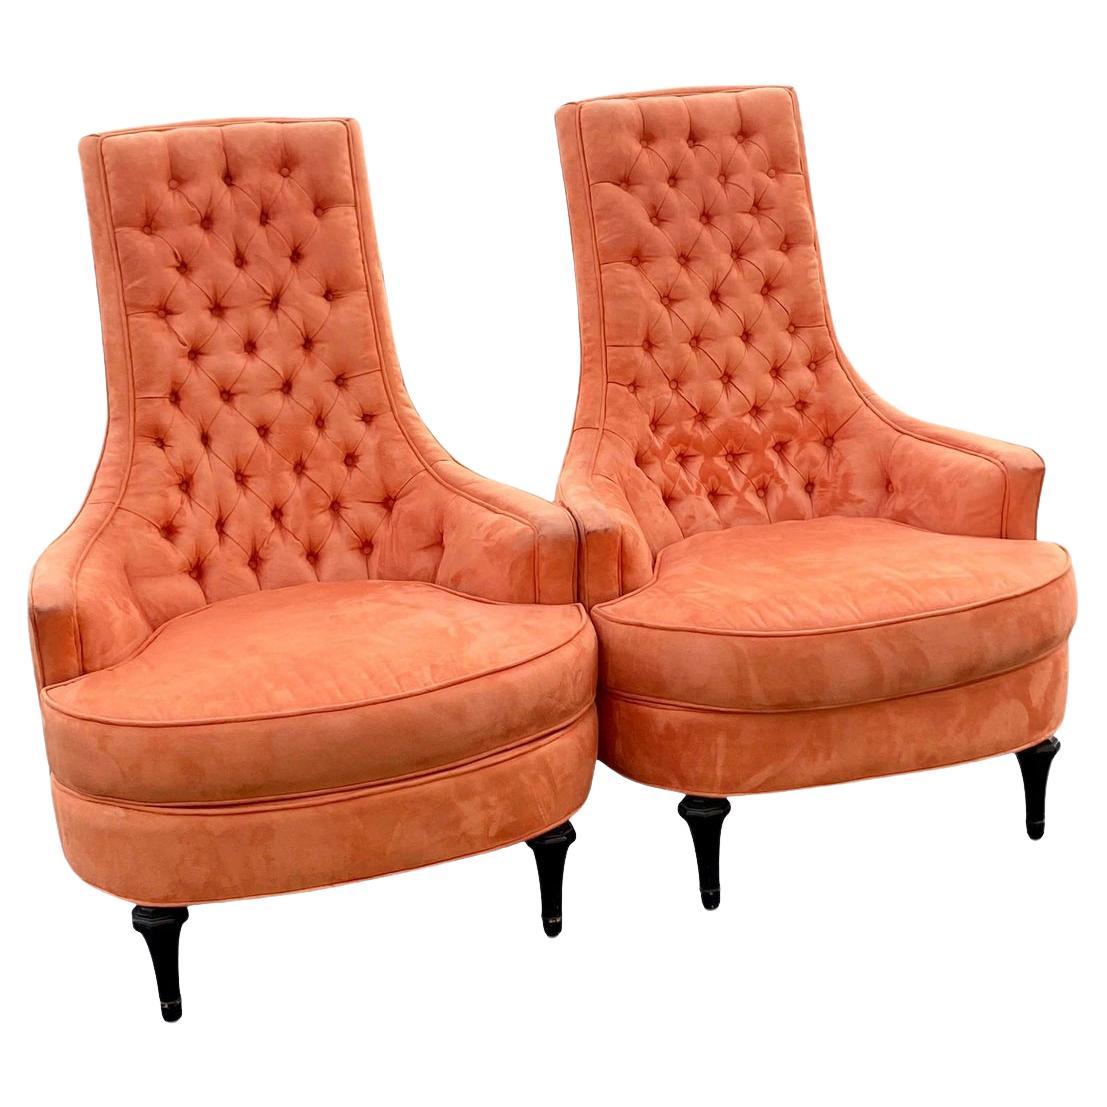 MCM Tufted Highback Chairs, a Pair